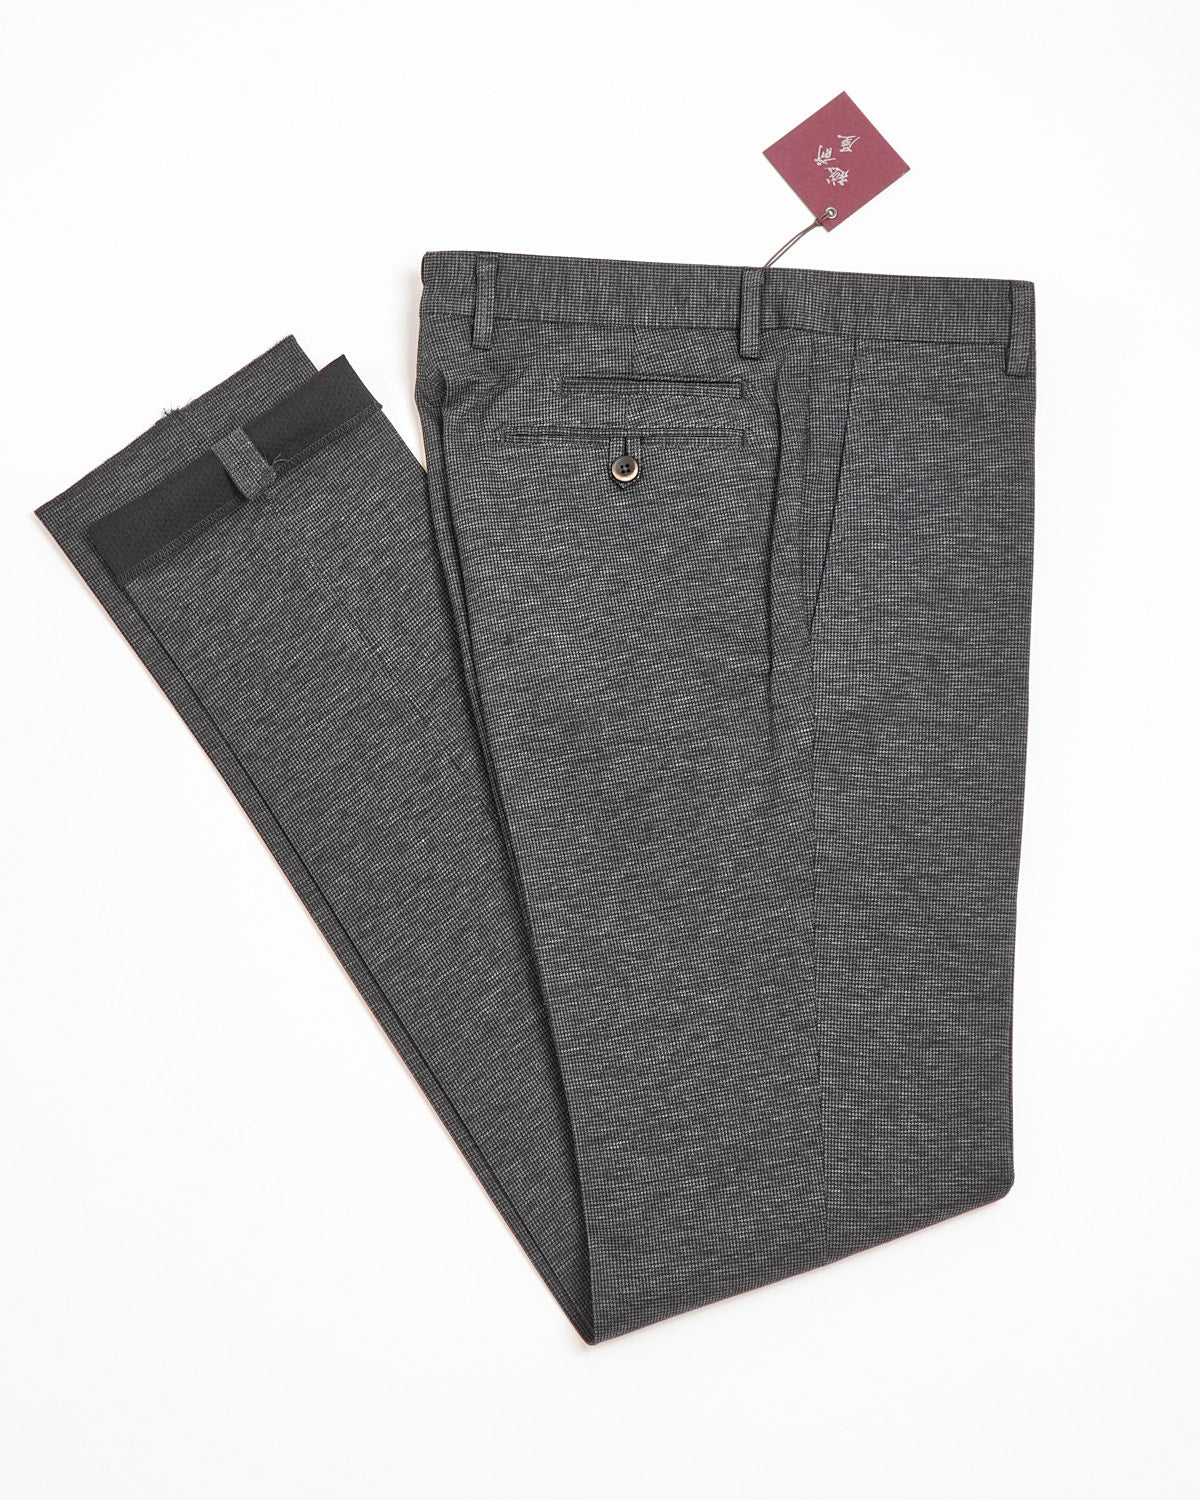 MEN WASHED JERSEY ANKLE LENGTH TROUSERS | Mens trousers, Trousers, Menswear